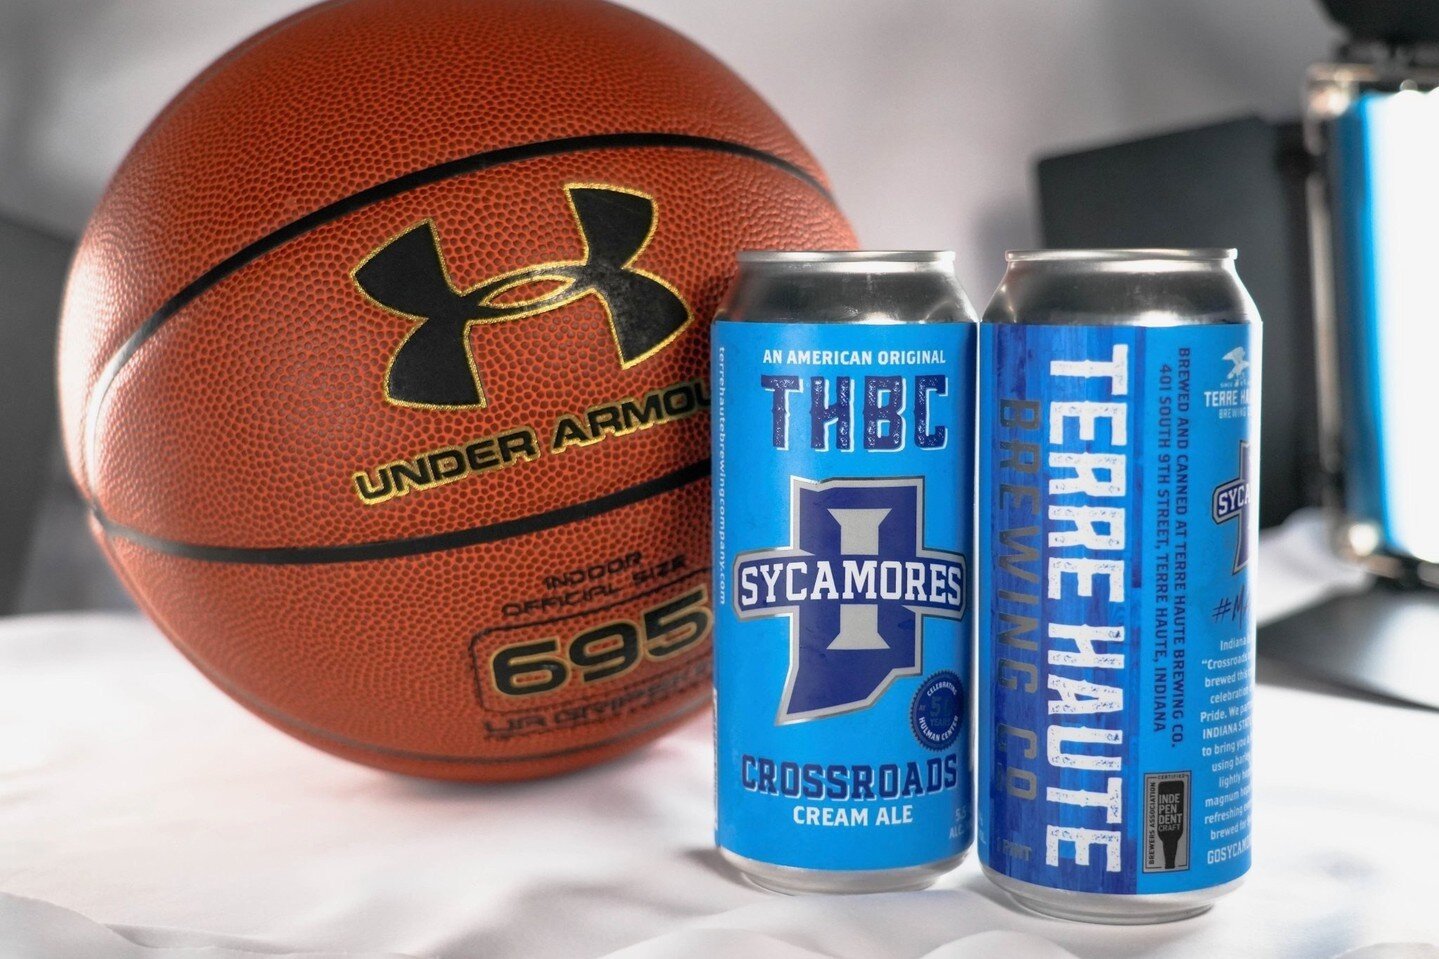 March Madness&hellip; @IndStBasketball&hellip; Crossroads cream ale&hellip; what else could you need?!?! 🏀 🍺